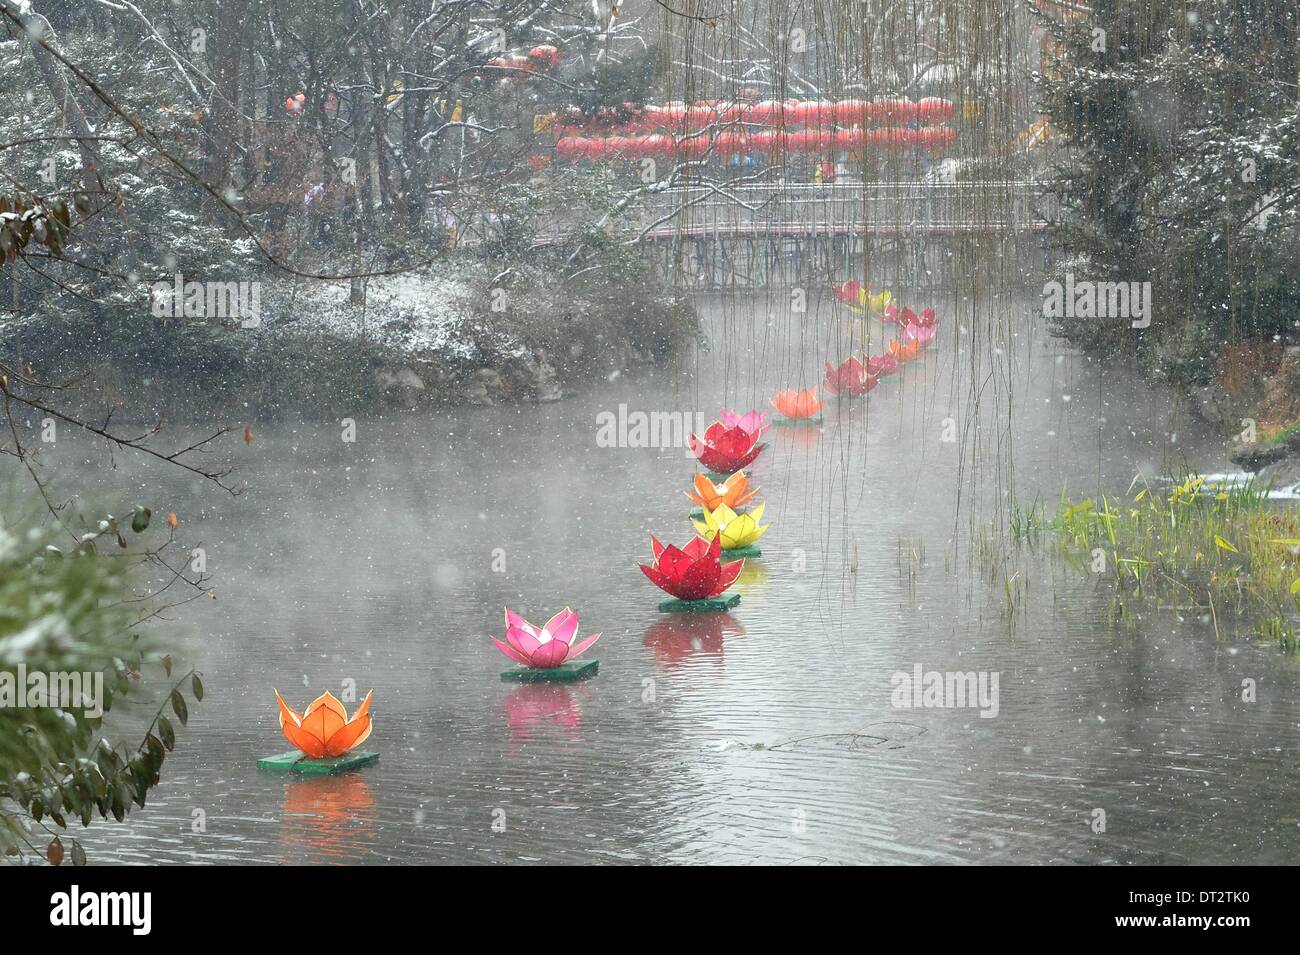 Jinan. 7th Feb, 2014. Photo taken on Feb. 7, 2014 shows snowflakes falling on a spring at Baotu Spring Park in Jinan, capital of east China's Shandong Province. A slight snow hit Jinan on Friday. Credit:  Xu Suhui/Xinhua/Alamy Live News Stock Photo